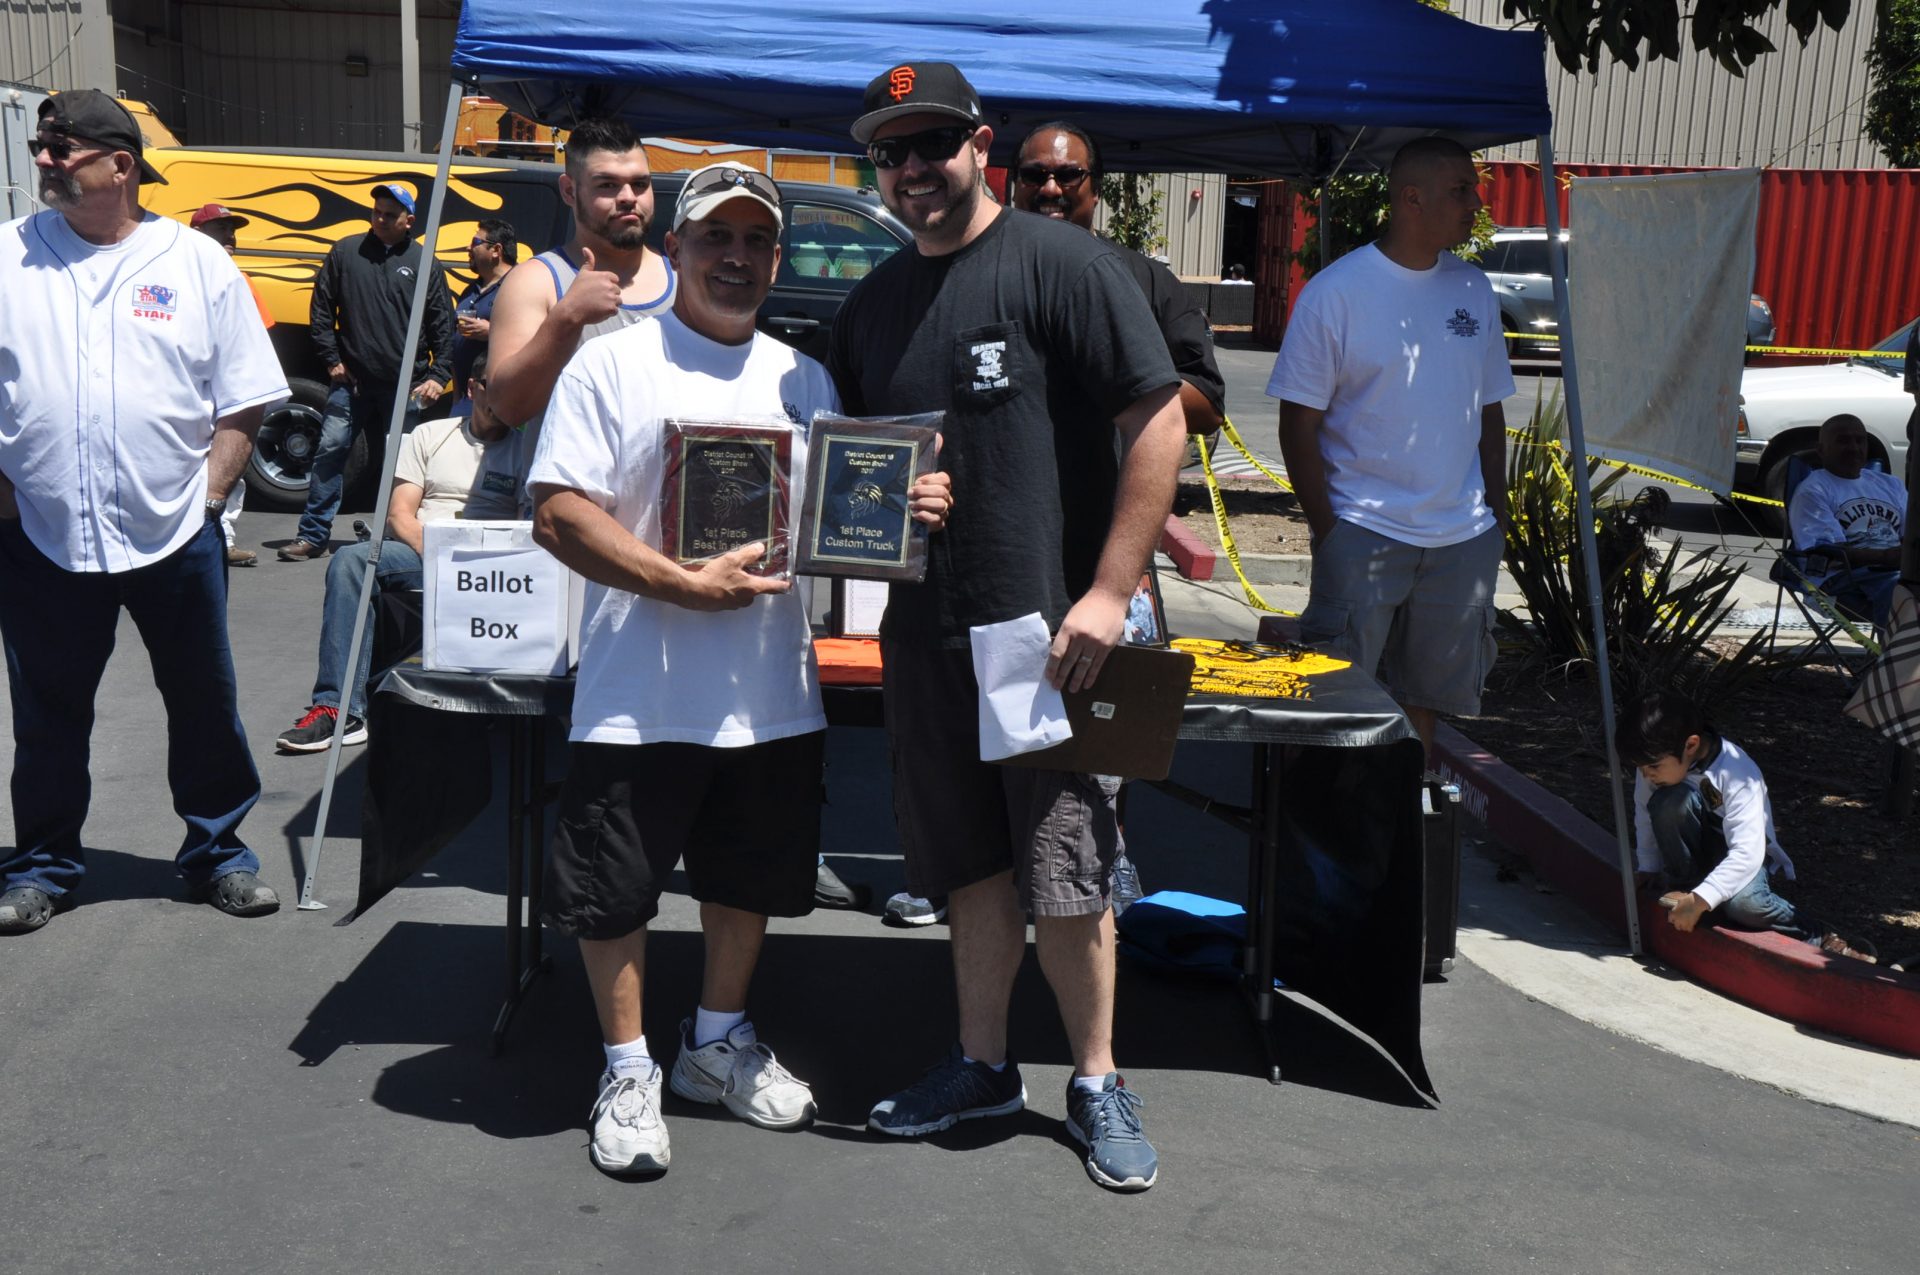 Image from the Gallery: Car Show & Chili Cook Off – San Leandro, CA